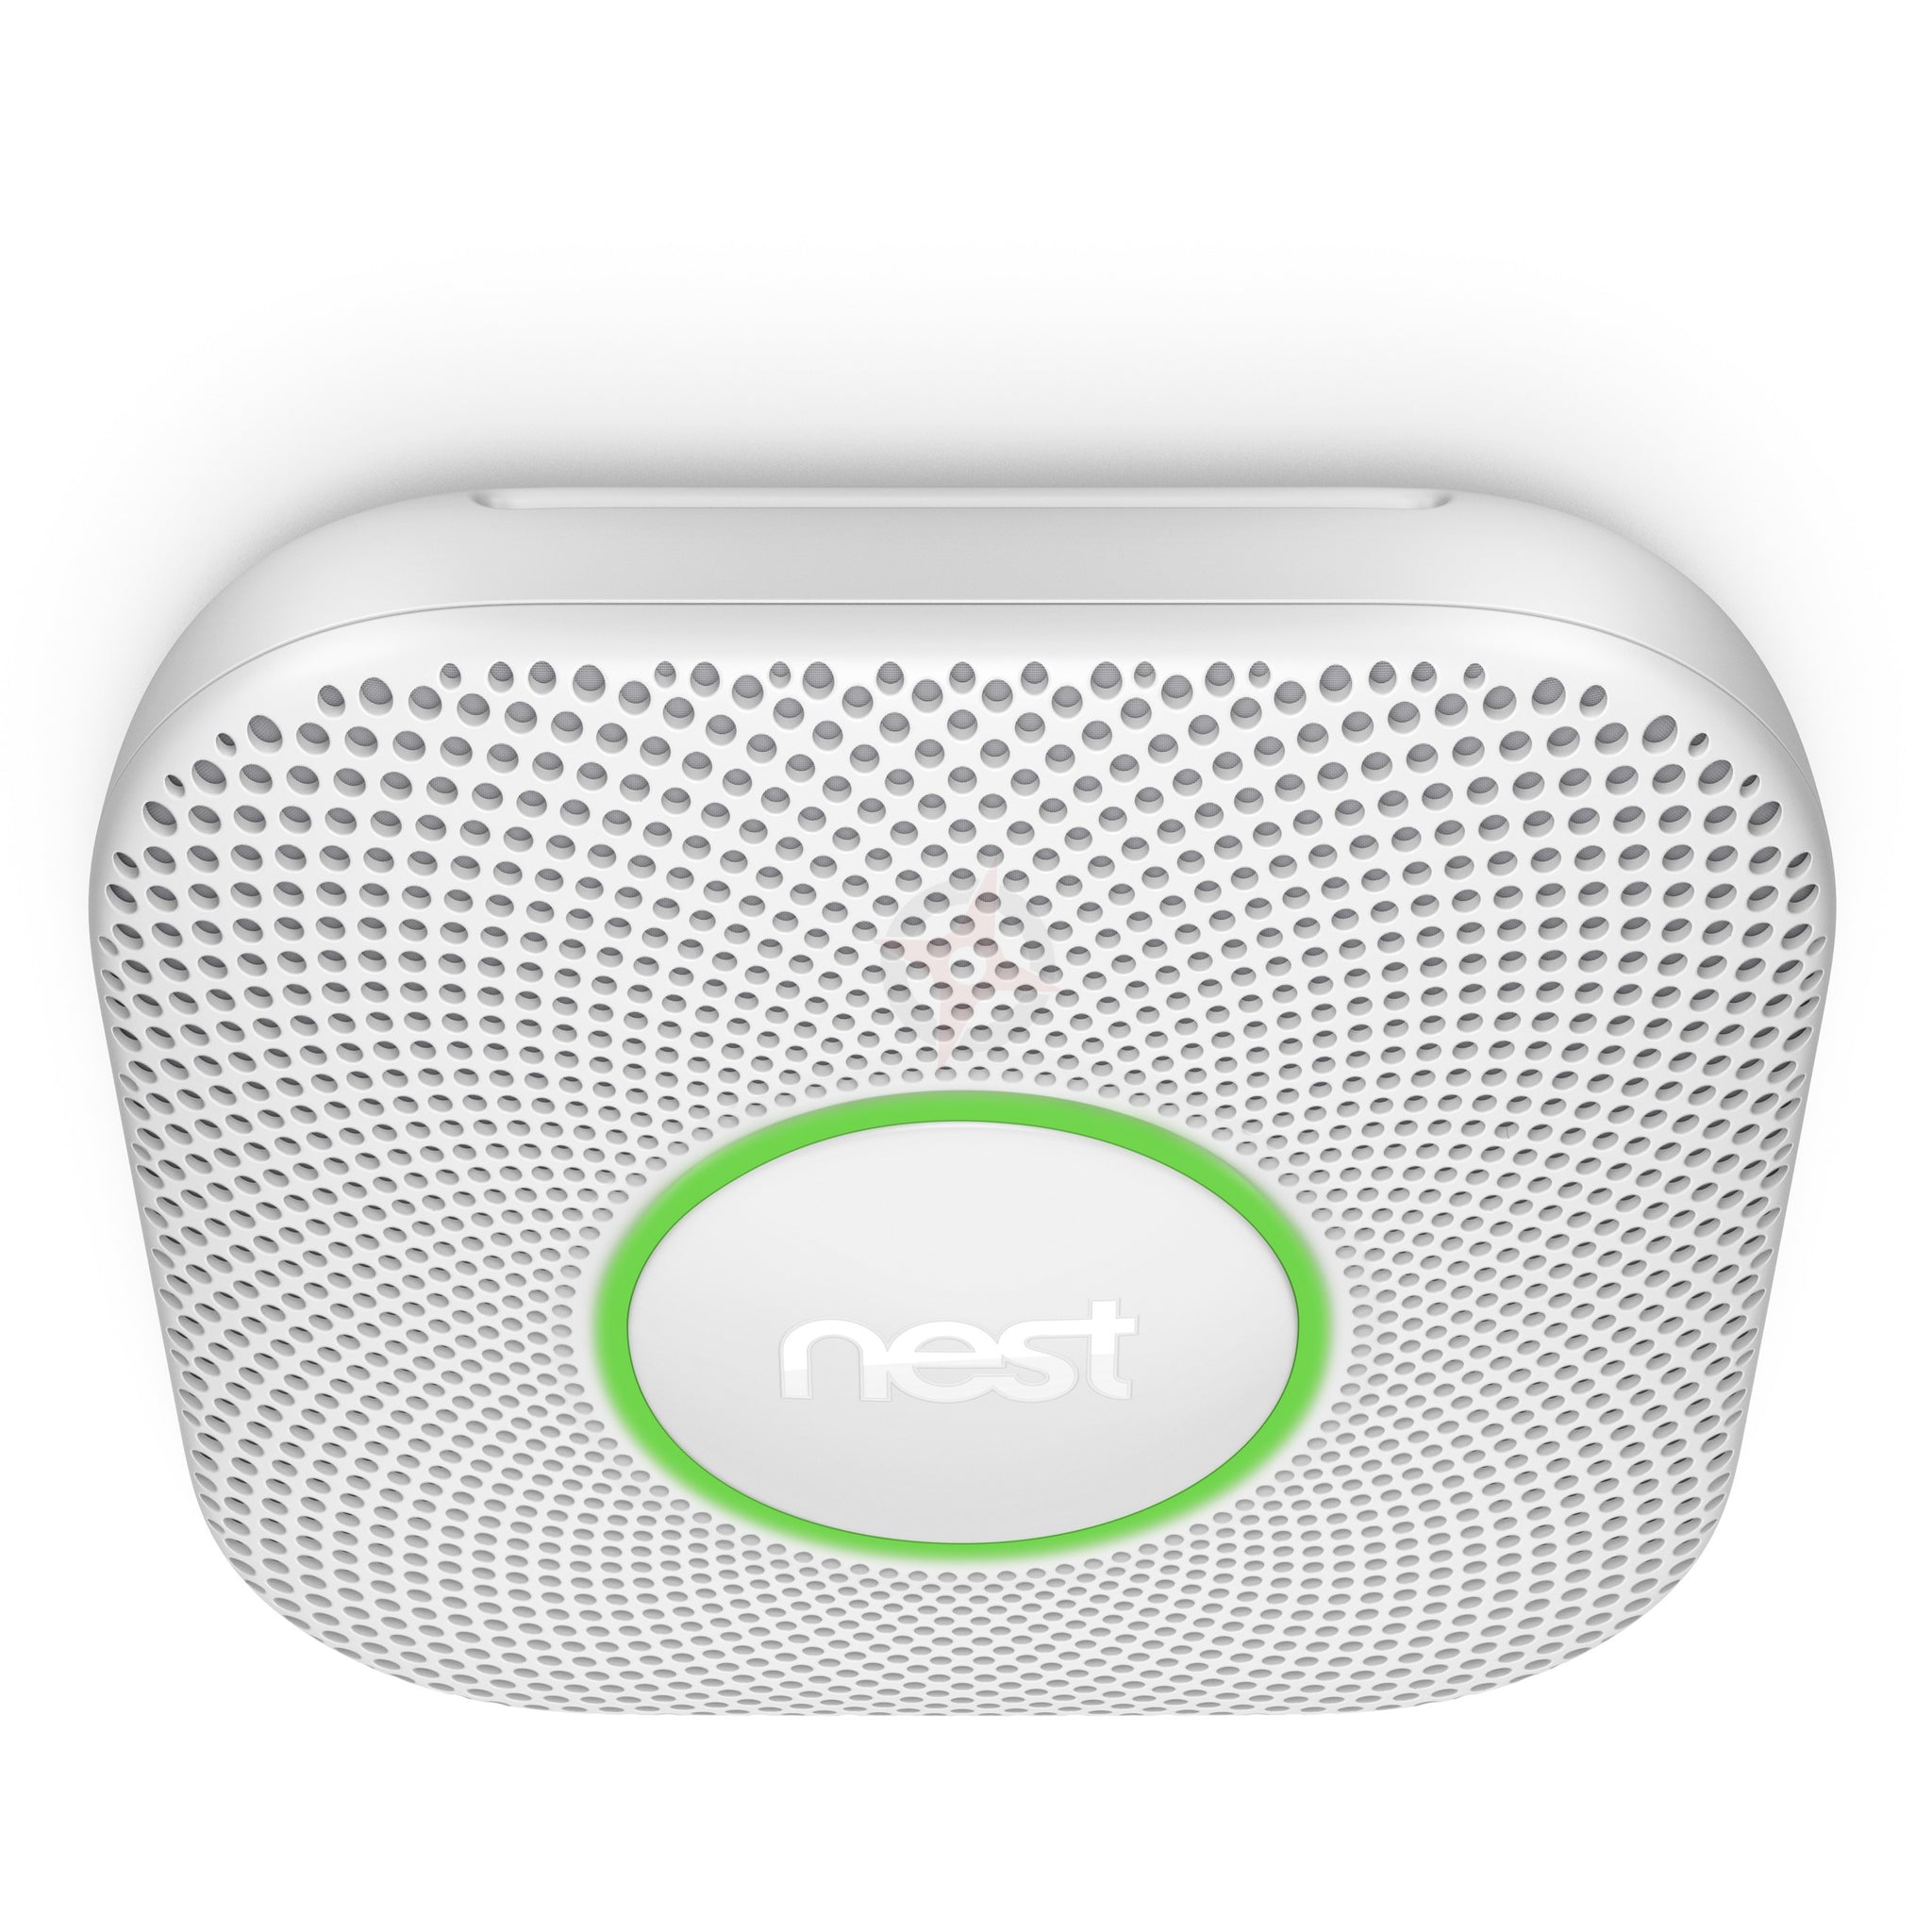 A google nest protect, 2nd generation, smart smoke and carbon monoxide detector showing a green light